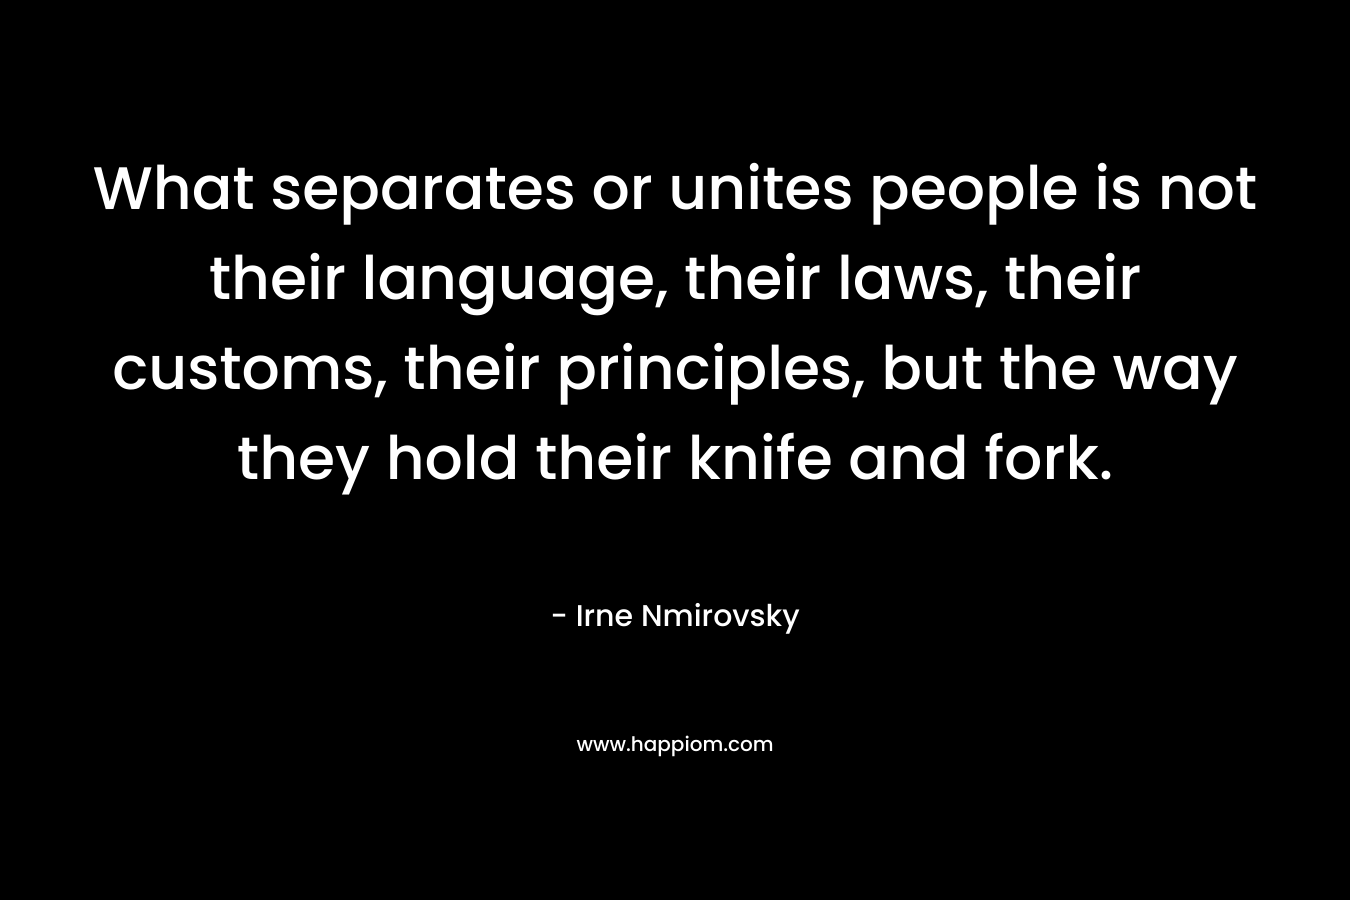 What separates or unites people is not their language, their laws, their customs, their principles, but the way they hold their knife and fork.